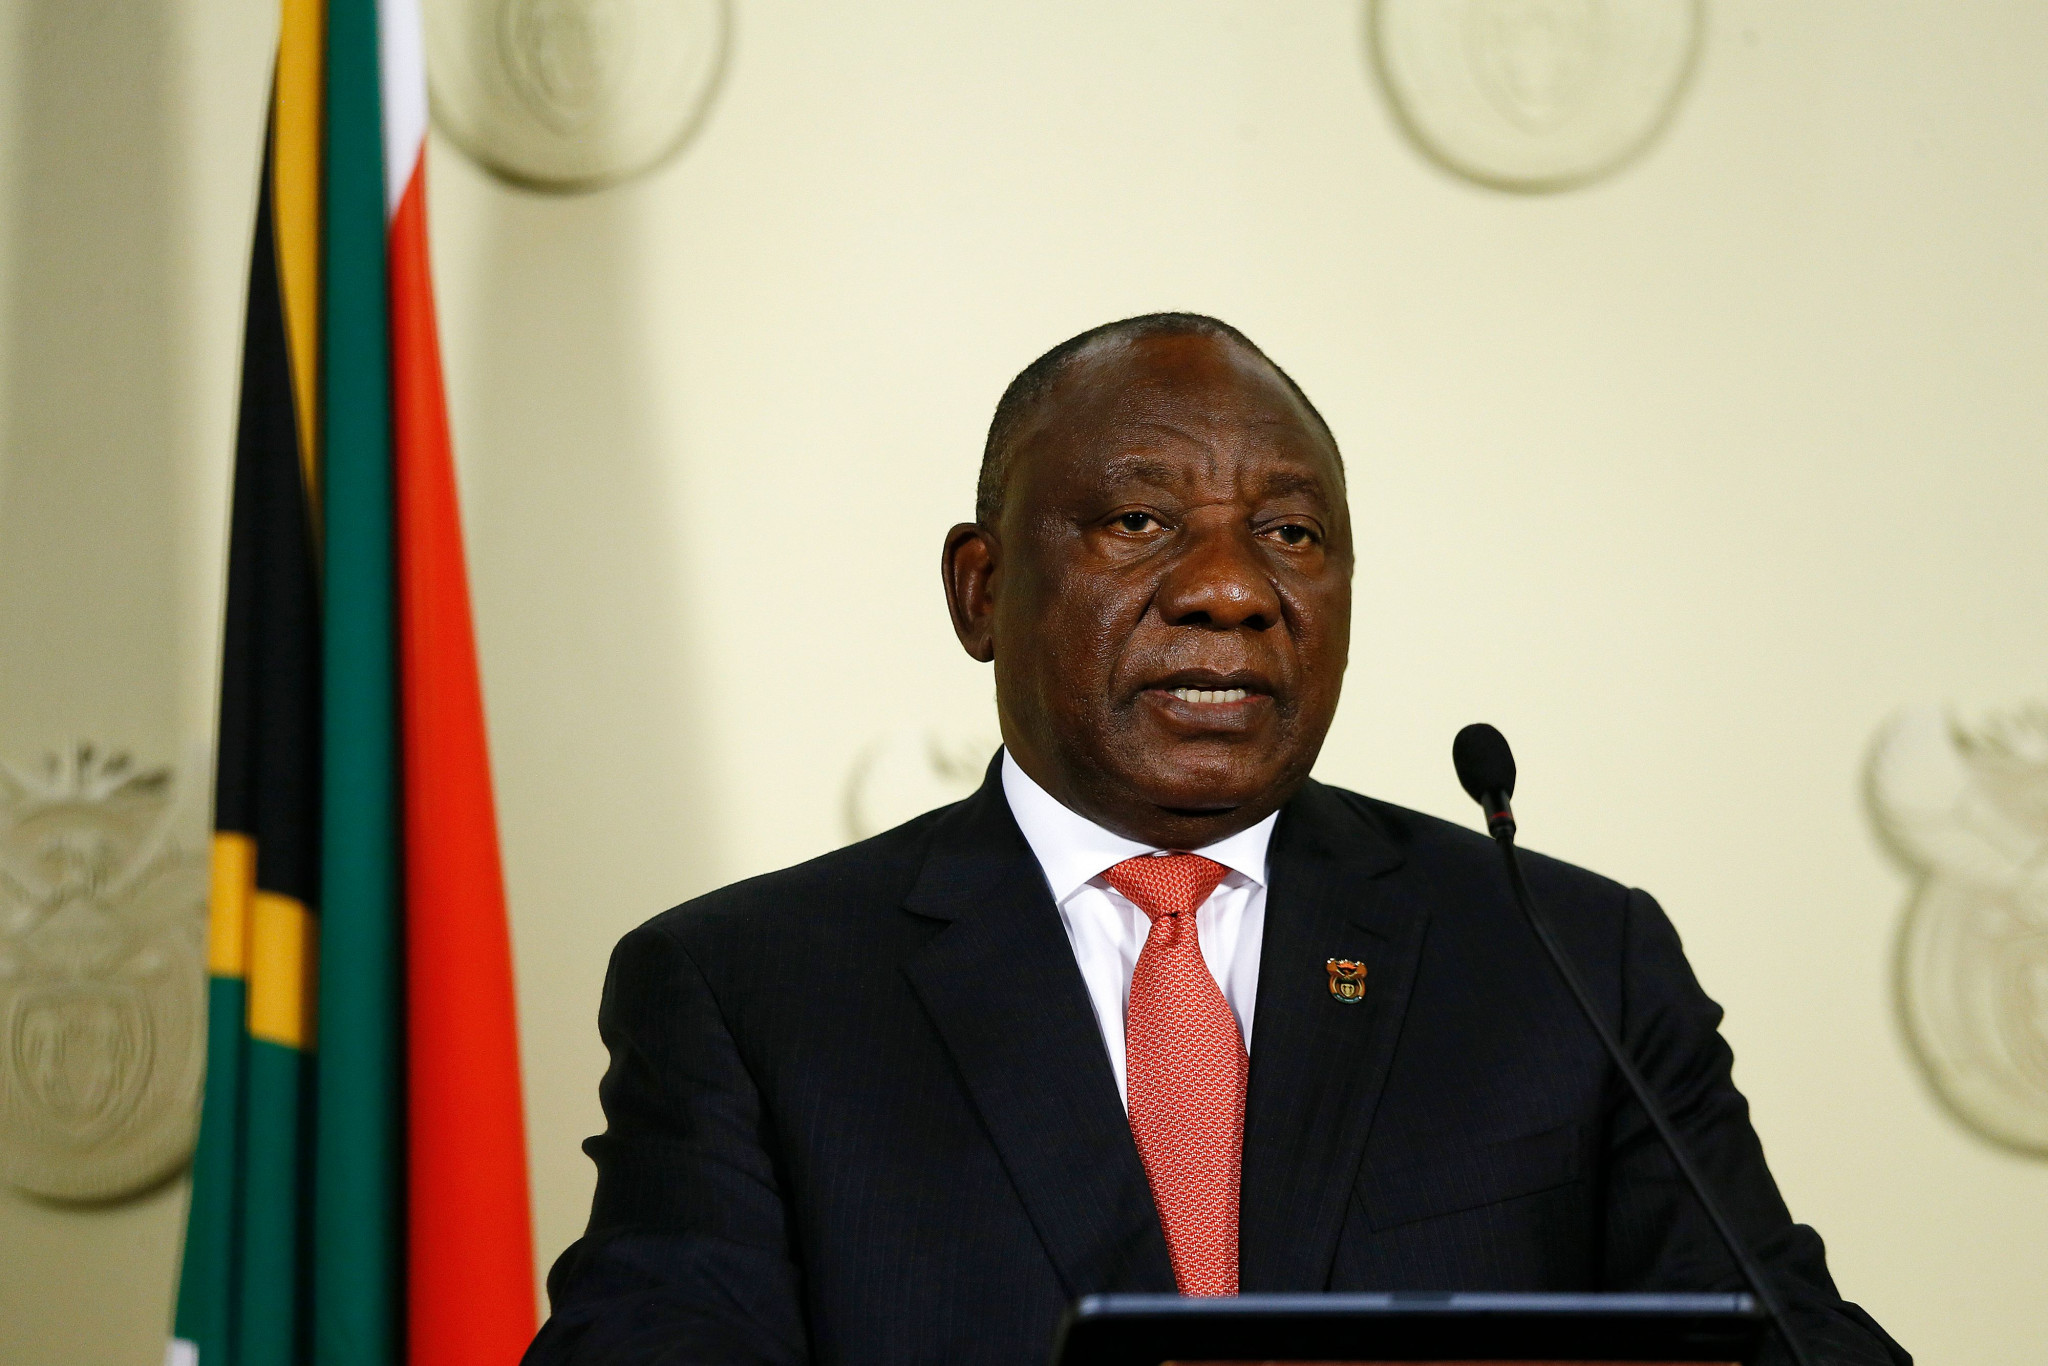 South African President Cyril Ramaphosa has prohibited gatherings of more than 100 people ©Getty Images